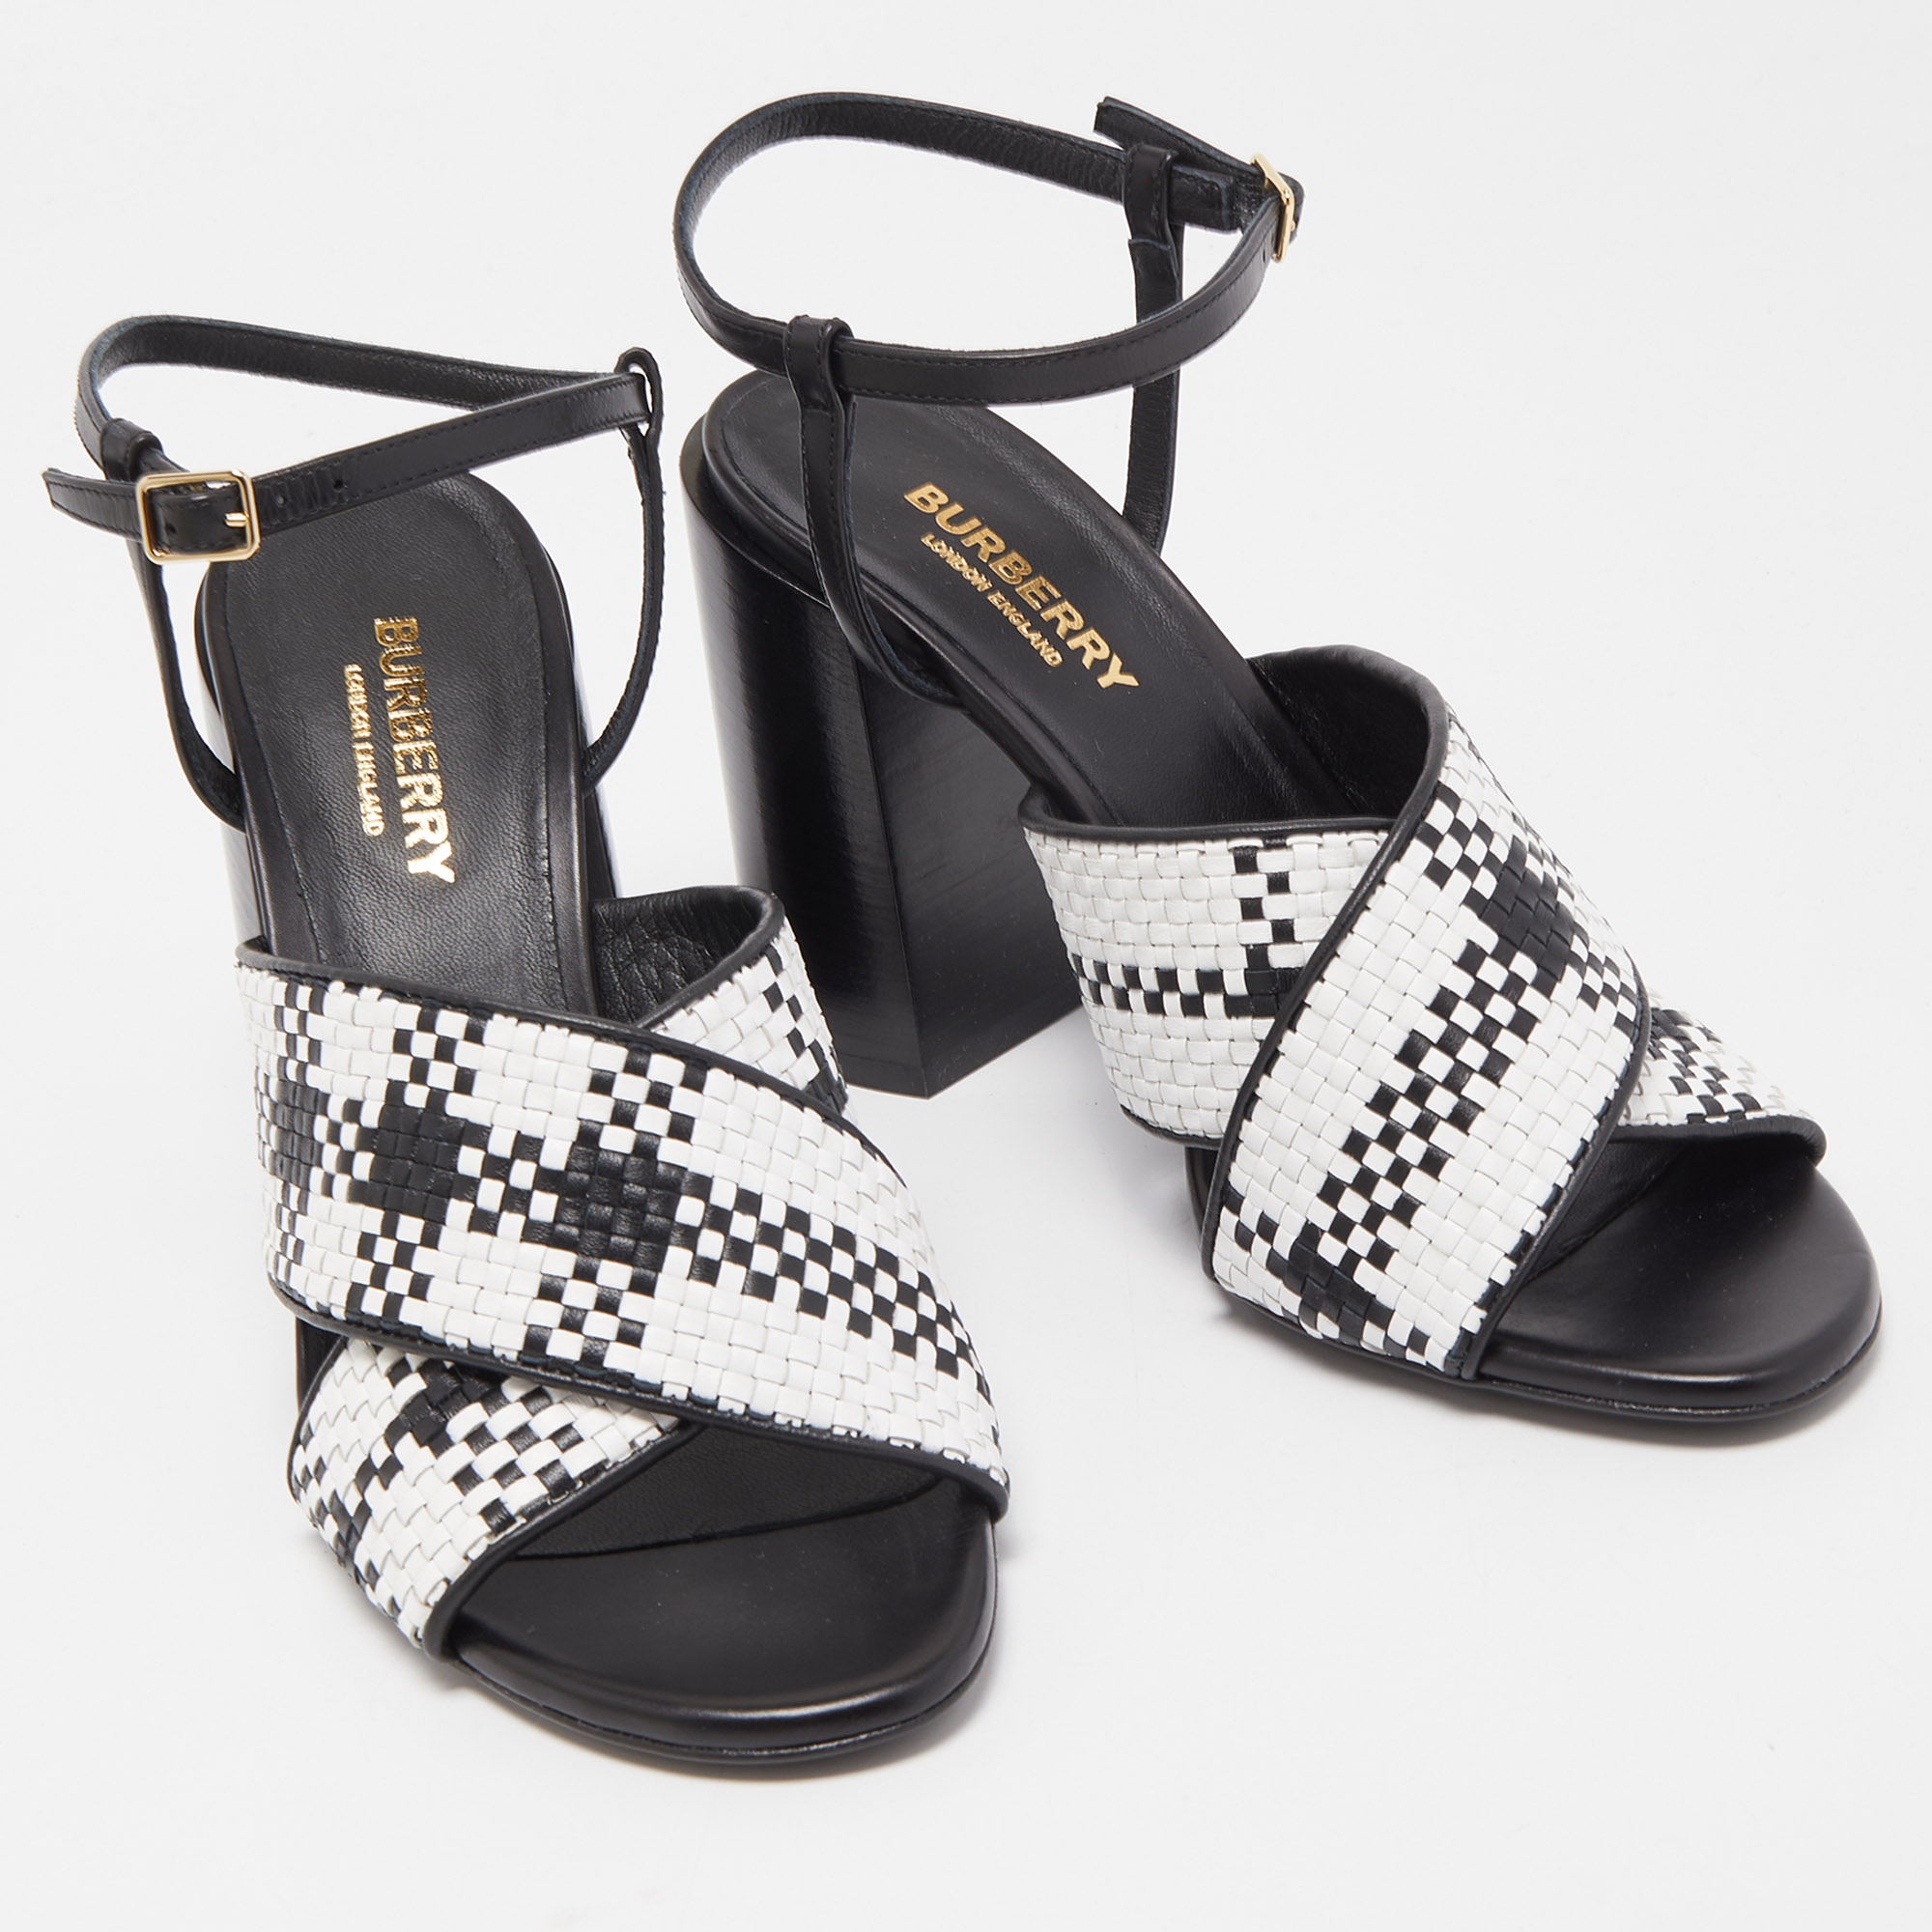 Burberry Black/White Woven Leather Castlebar Ankle Strap Sandals Size 37